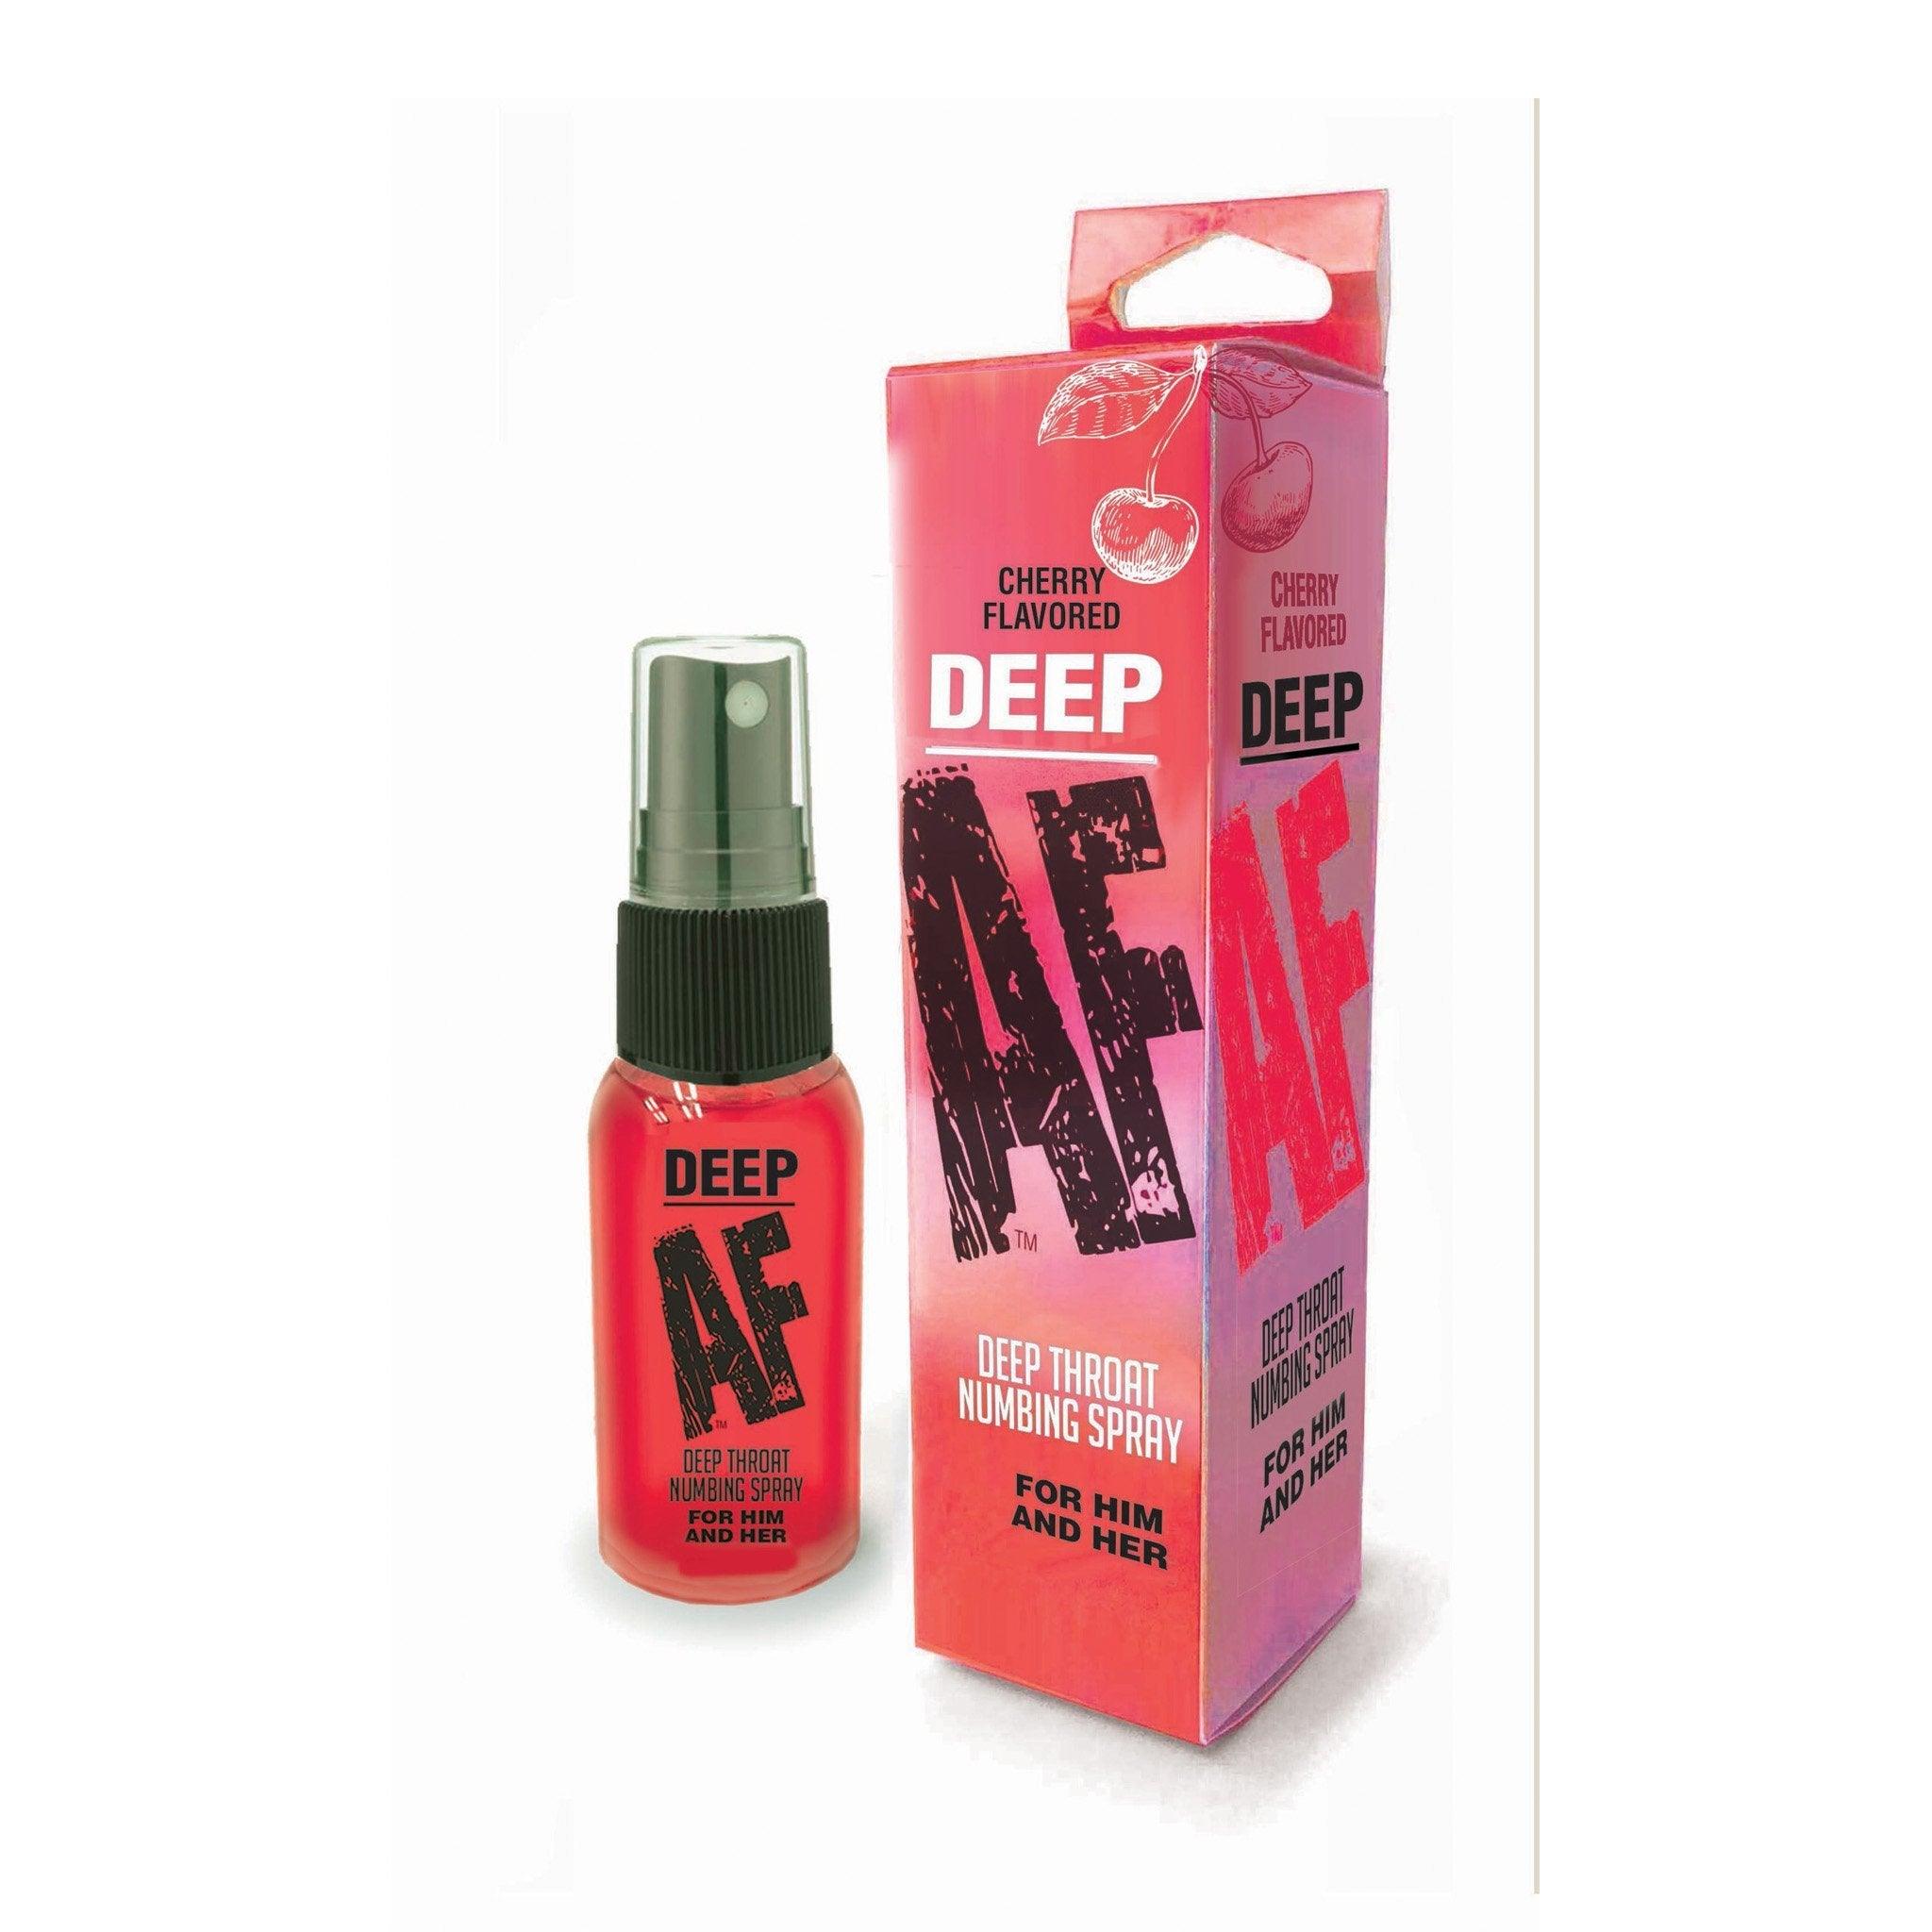 Deep AF Deep Throat Numbing Spray for All 1 oz (29 mL) - 2 Flavors to Choose From - CheapLubes.com